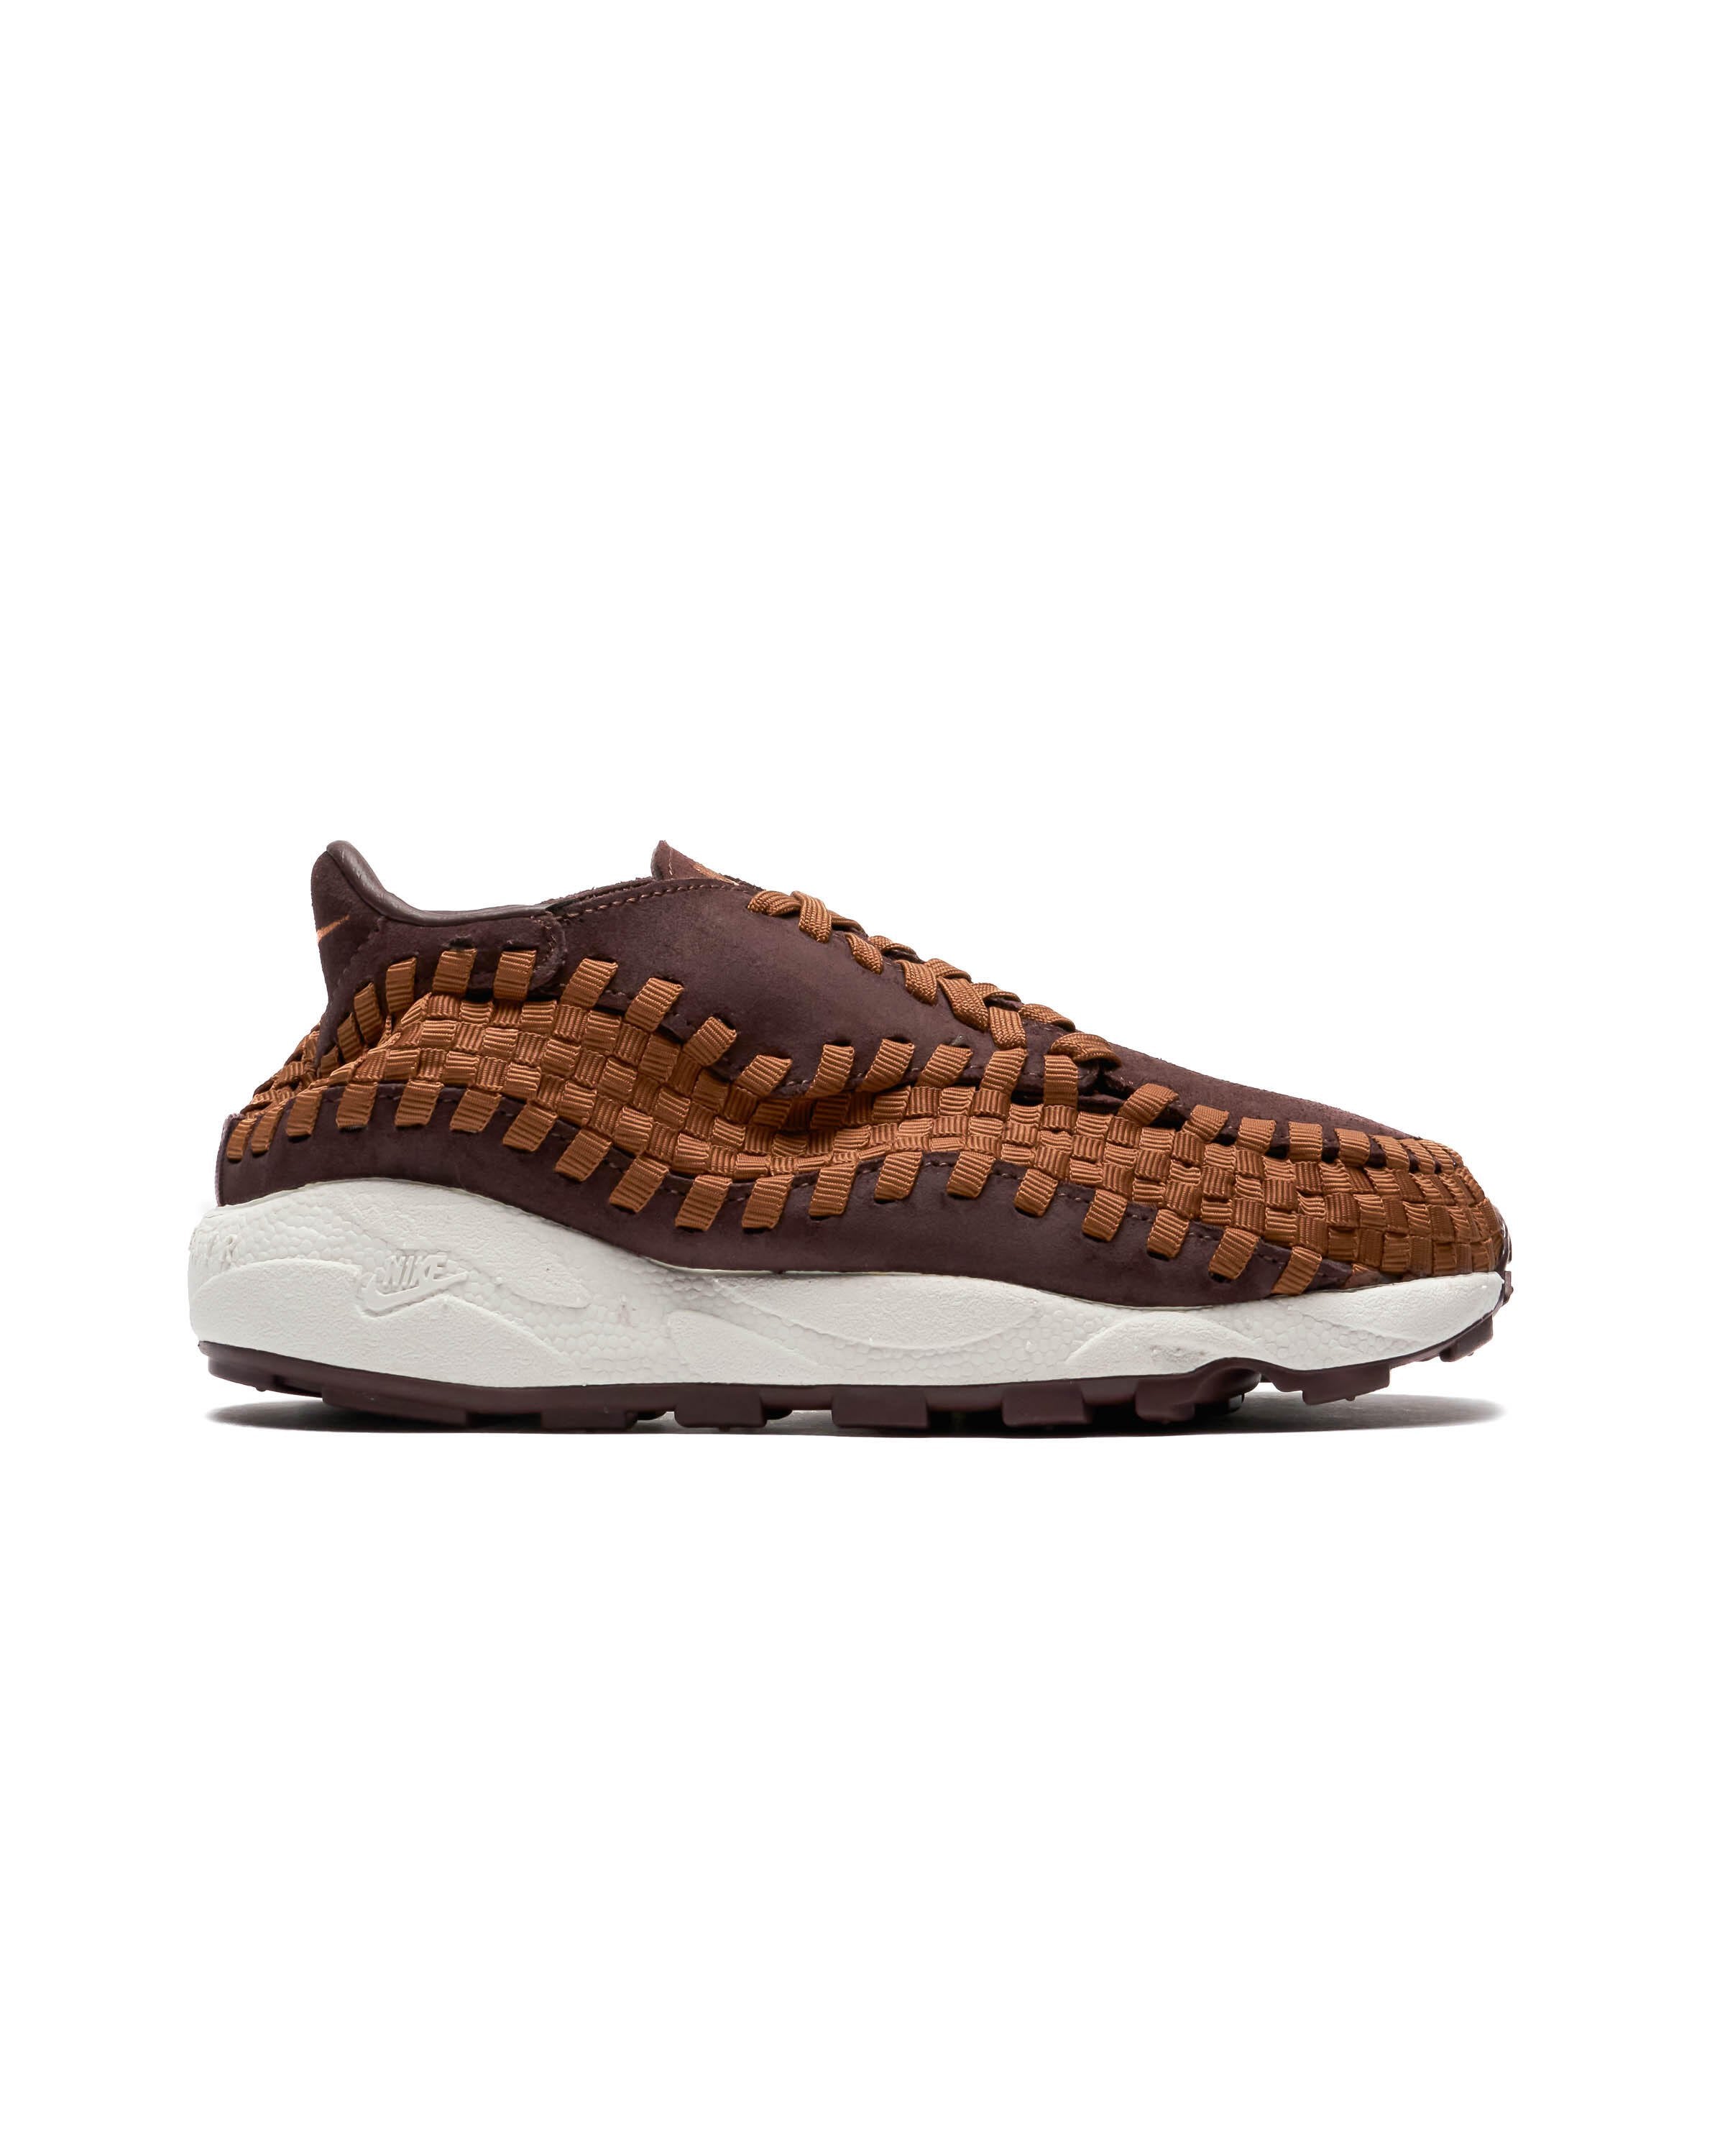 Nike WMNS AIR FOOTSCAPE WOVEN | FB1959-200 | AFEW STORE